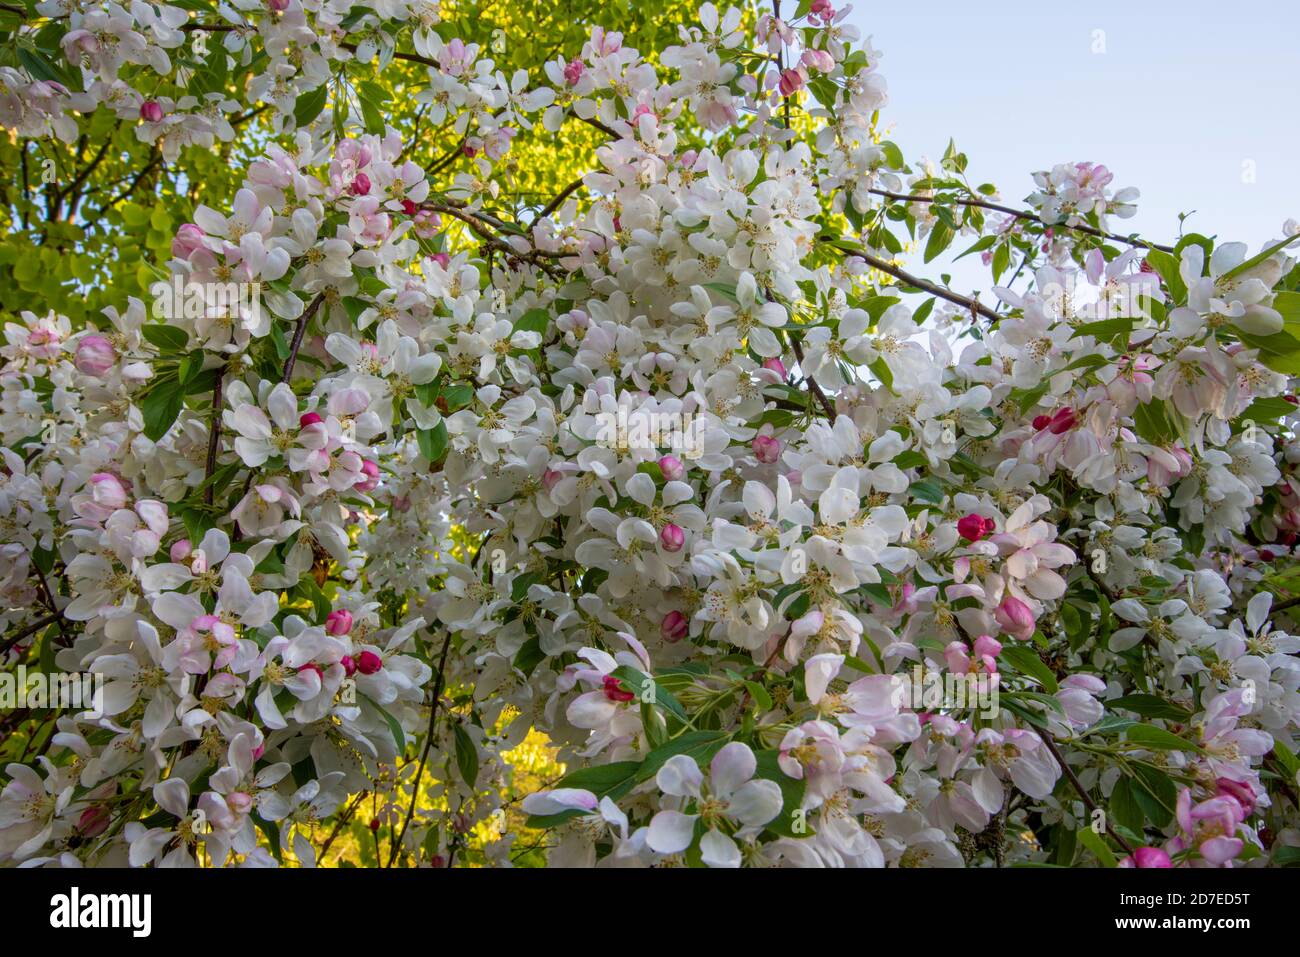 Weeping crab apple, Malus 'Sun Rival', in bloom. Branches covered with white blossom and pink buds. Tree foliage and blue sky in the background. Stock Photo